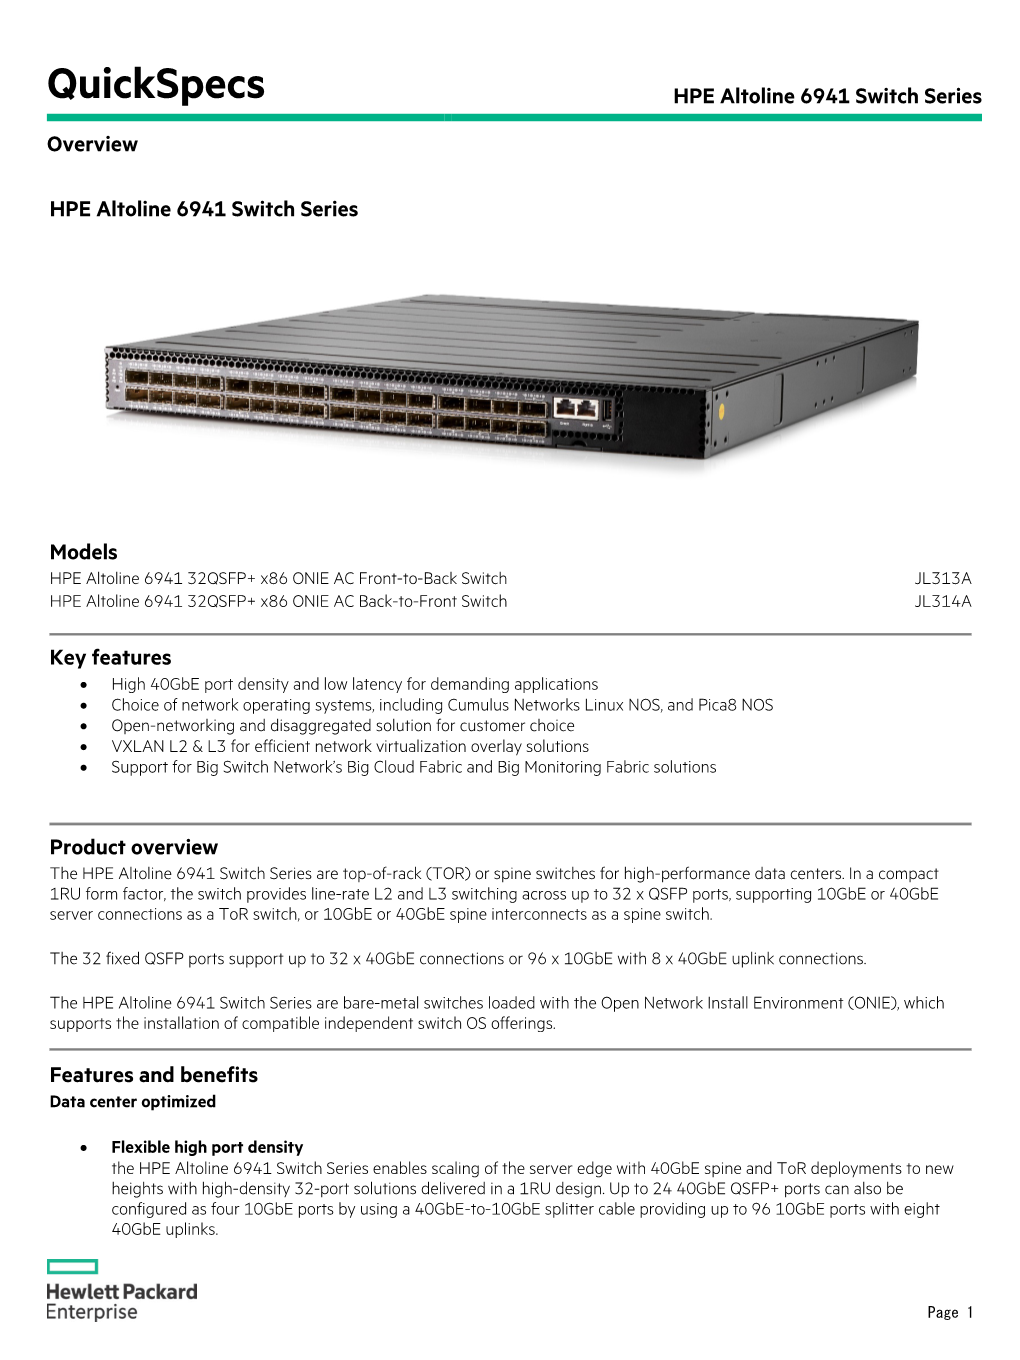 HPE Altoline 6941 Switch Series Overview